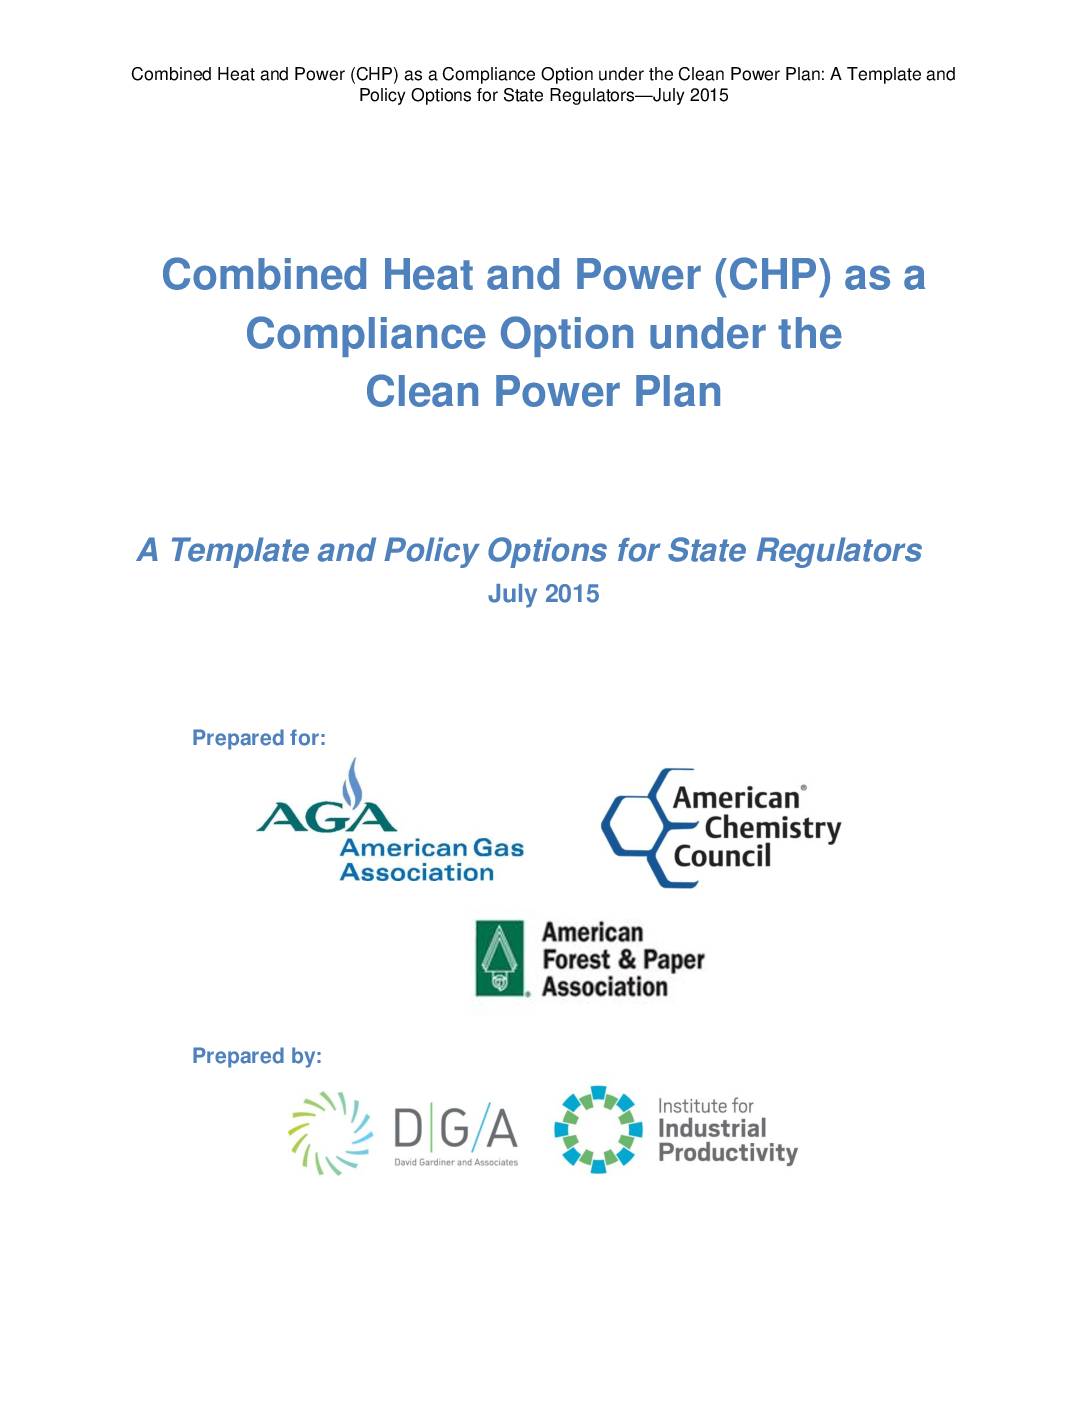 Combined Heat and Power (CHP) as a Compliance Option under the Clean Power Plan: A Template and Policy Options for State Regulators